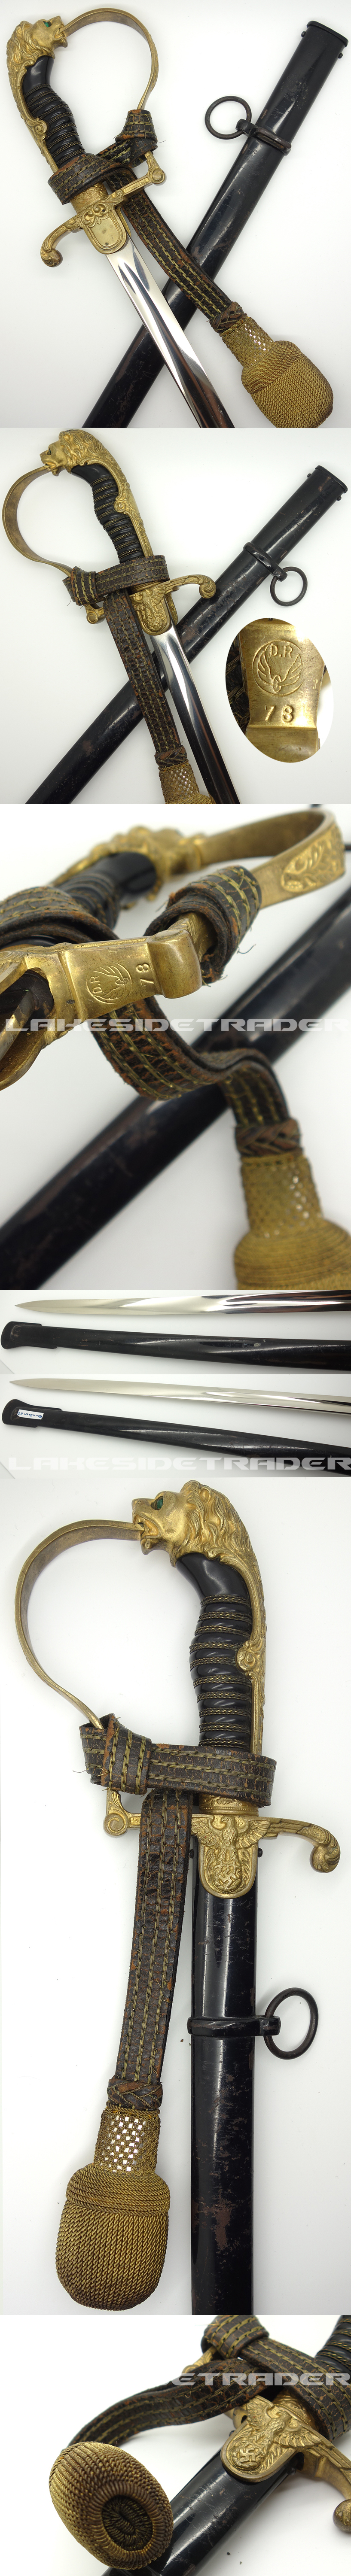 Railway Official Sword by WKC